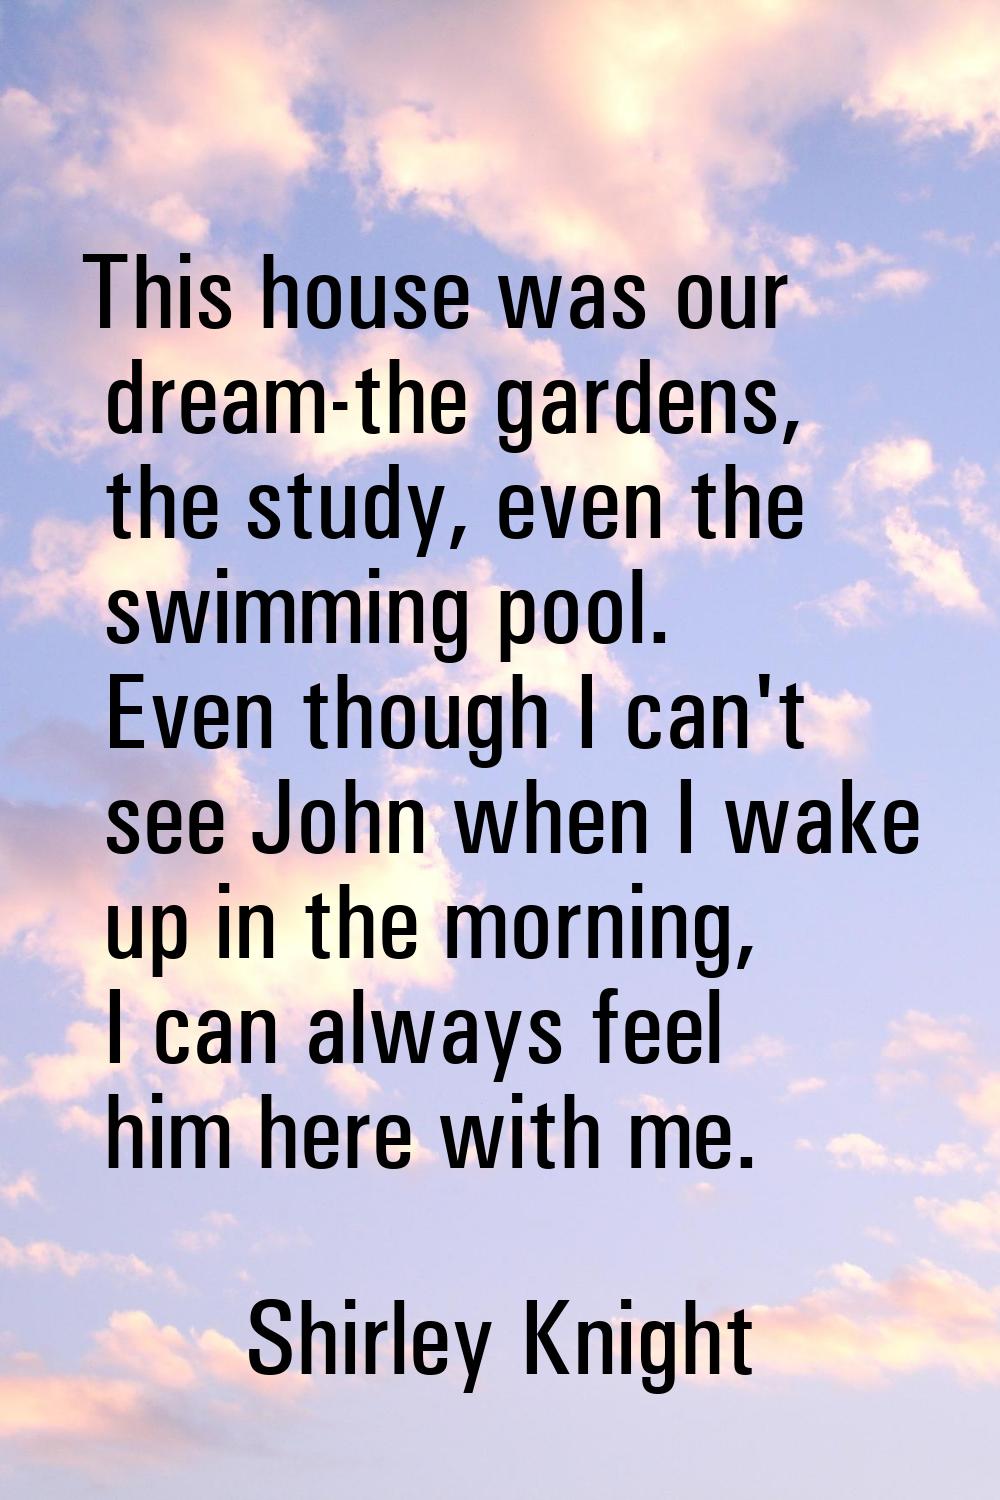 This house was our dream-the gardens, the study, even the swimming pool. Even though I can't see Jo